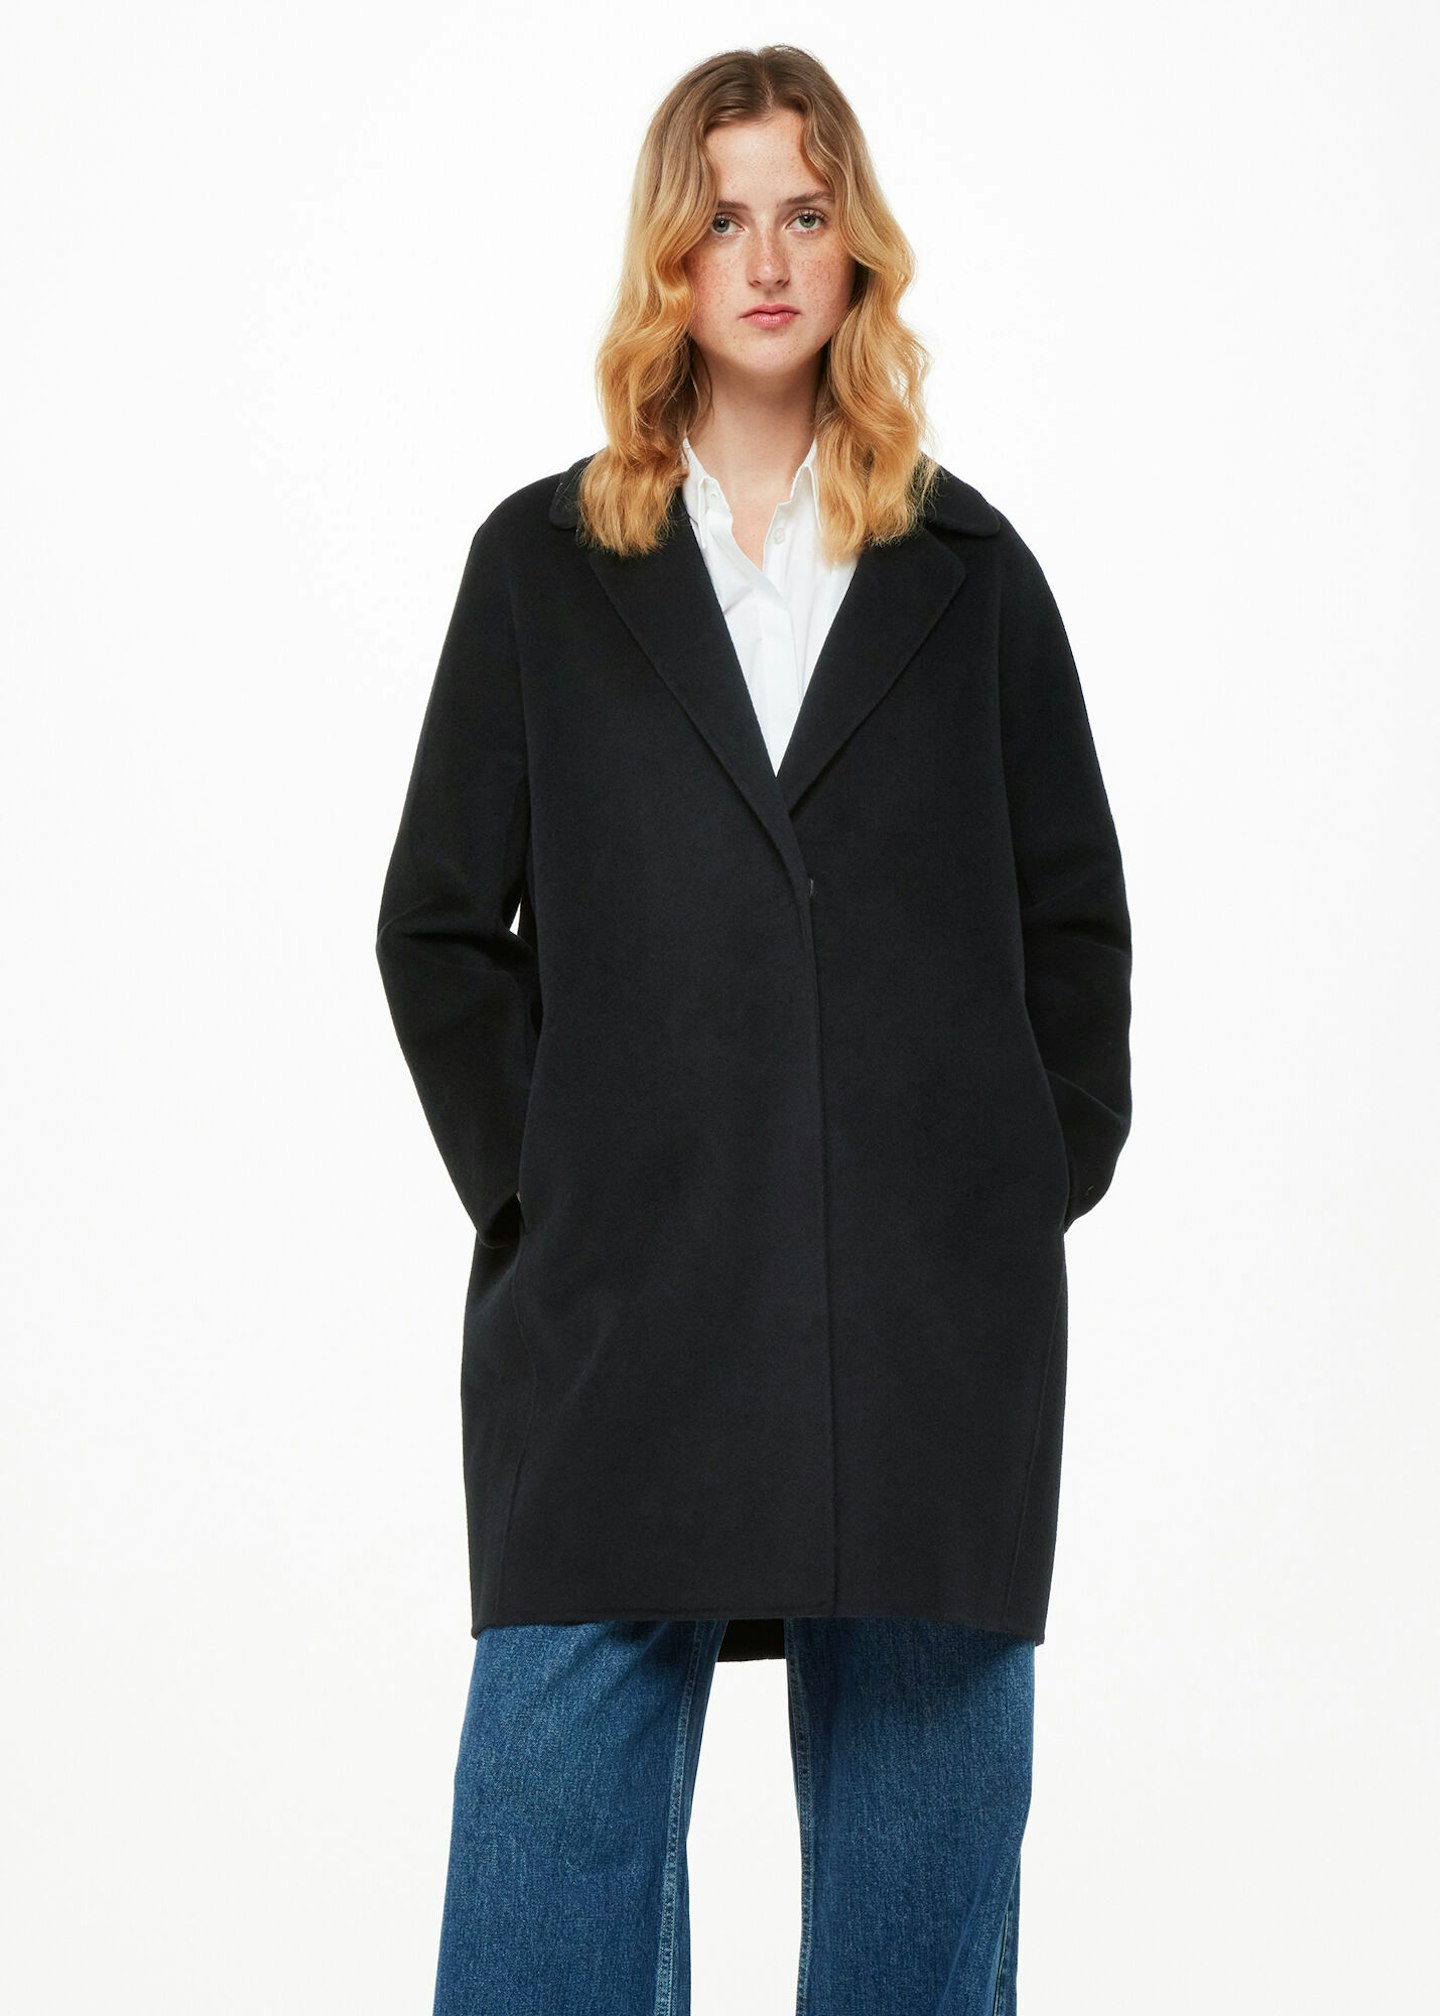 Whistles, Julia Wool Double-Faced Coat